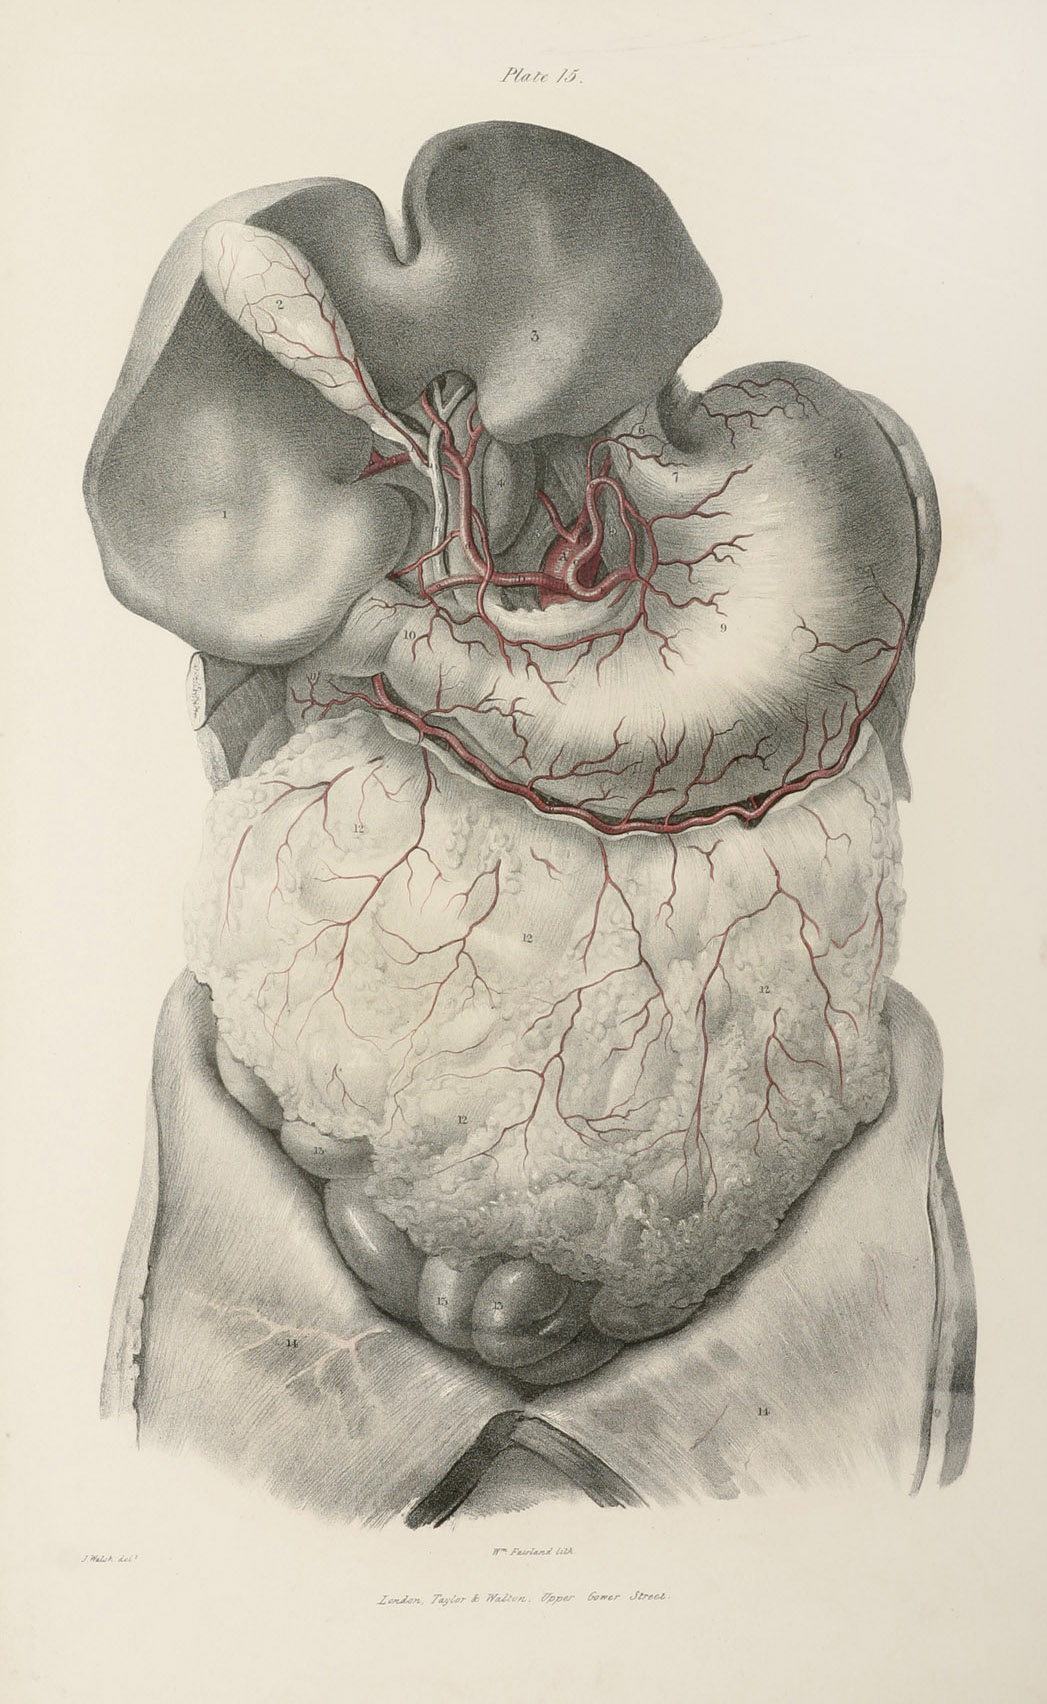 Arteries of the Liver and Stomach. - Antique Print from 1838